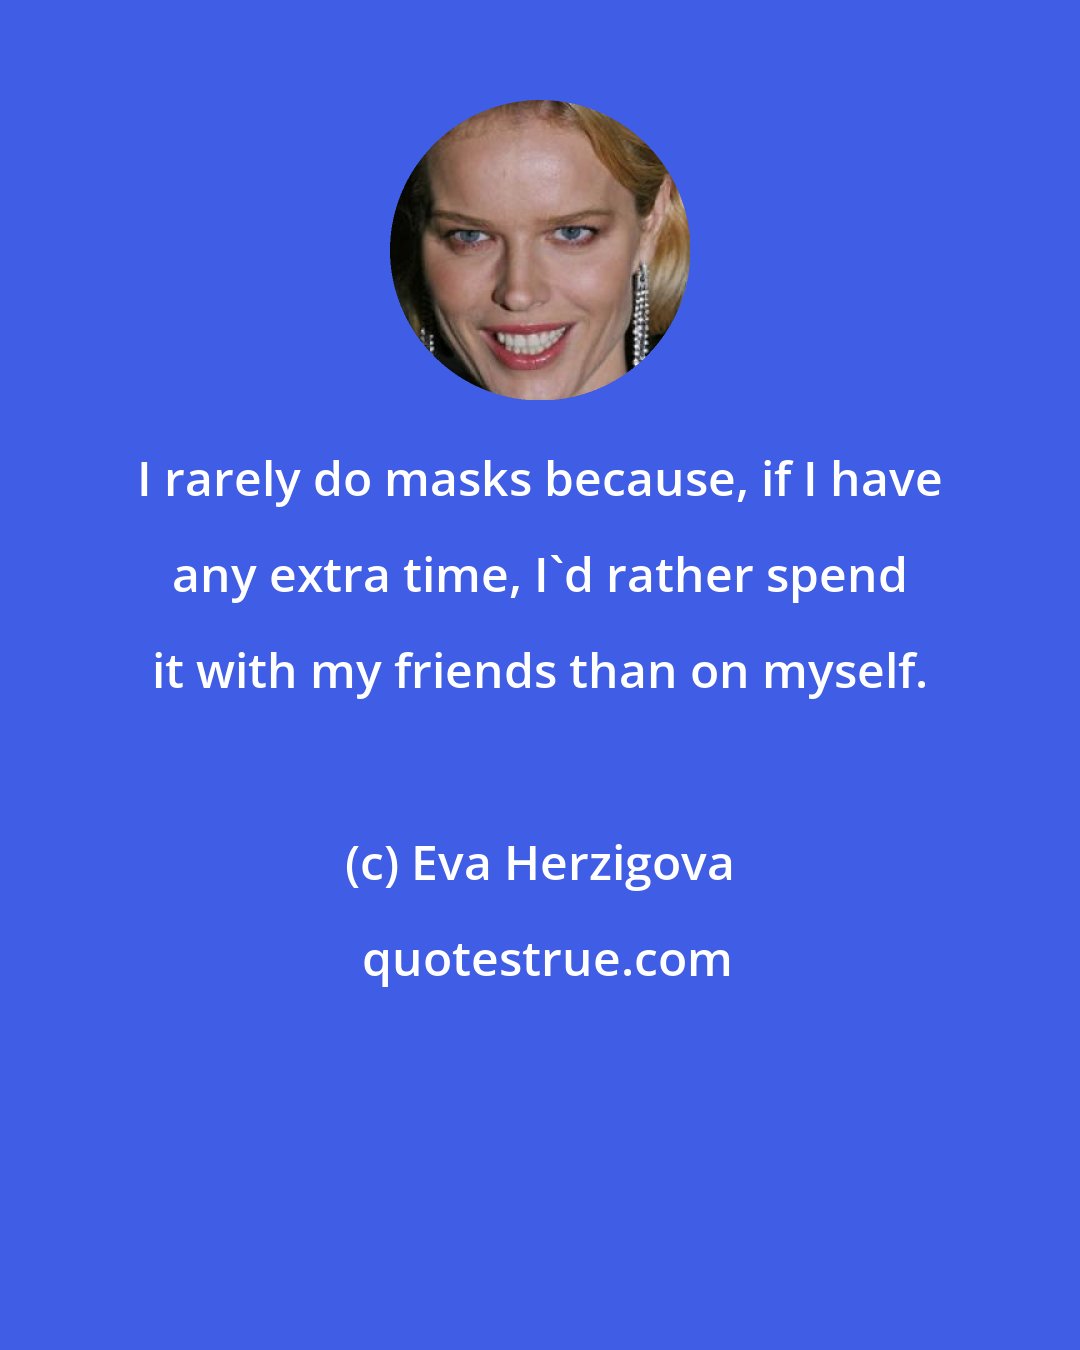 Eva Herzigova: I rarely do masks because, if I have any extra time, I'd rather spend it with my friends than on myself.